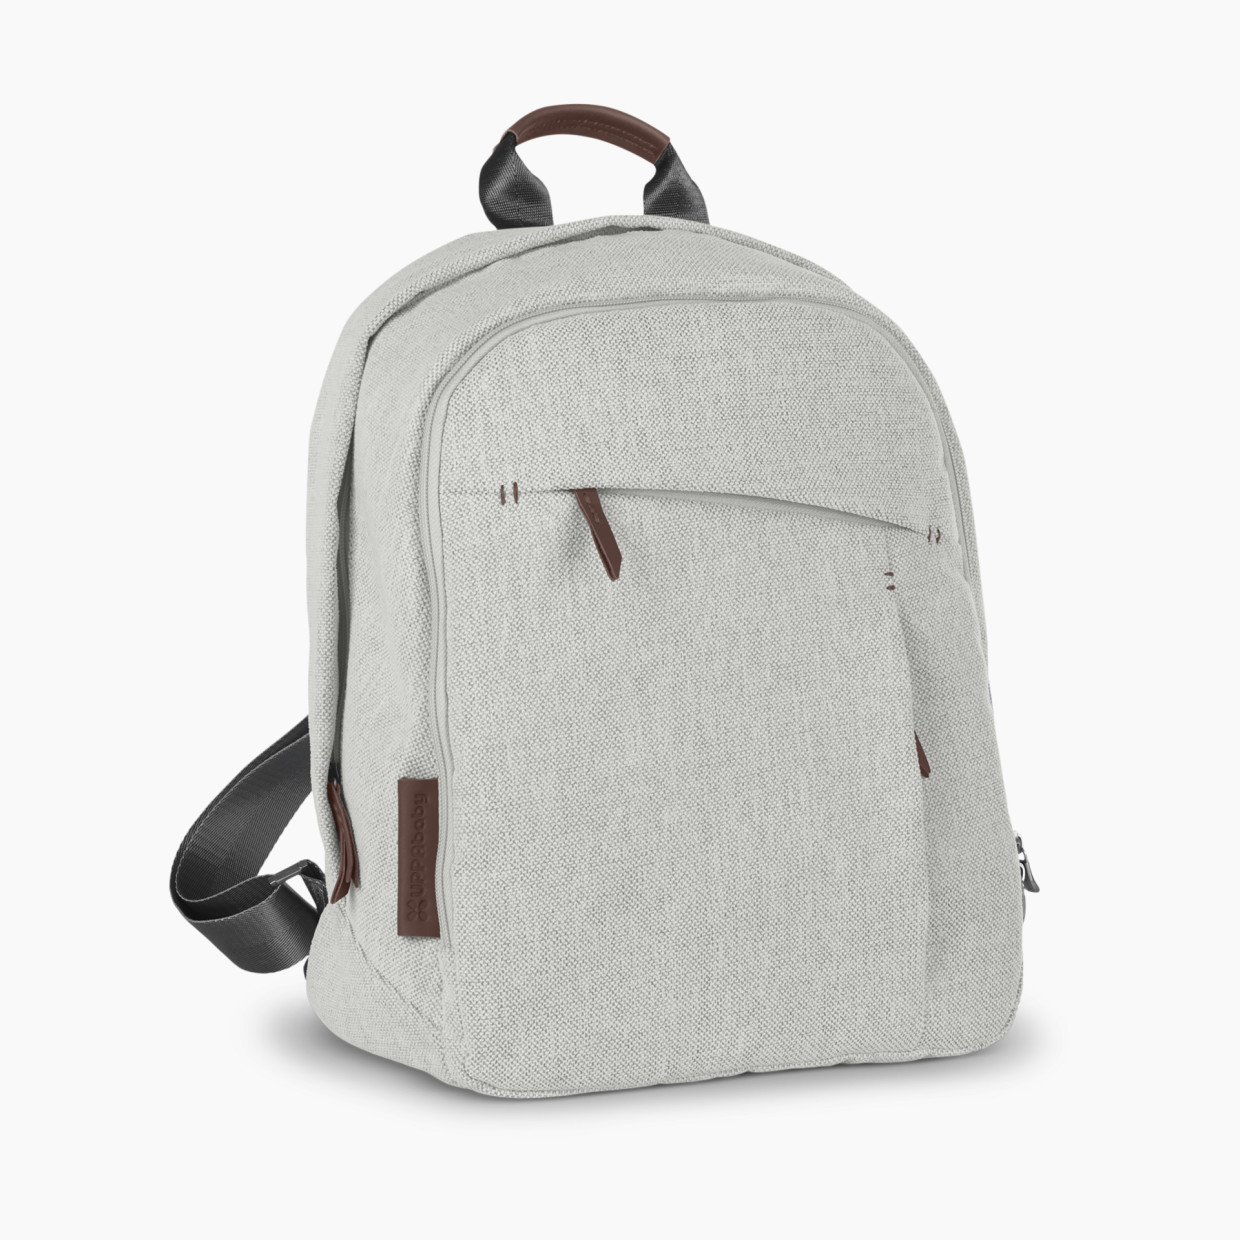 UPPAbaby Changing Backpack - Anthony.